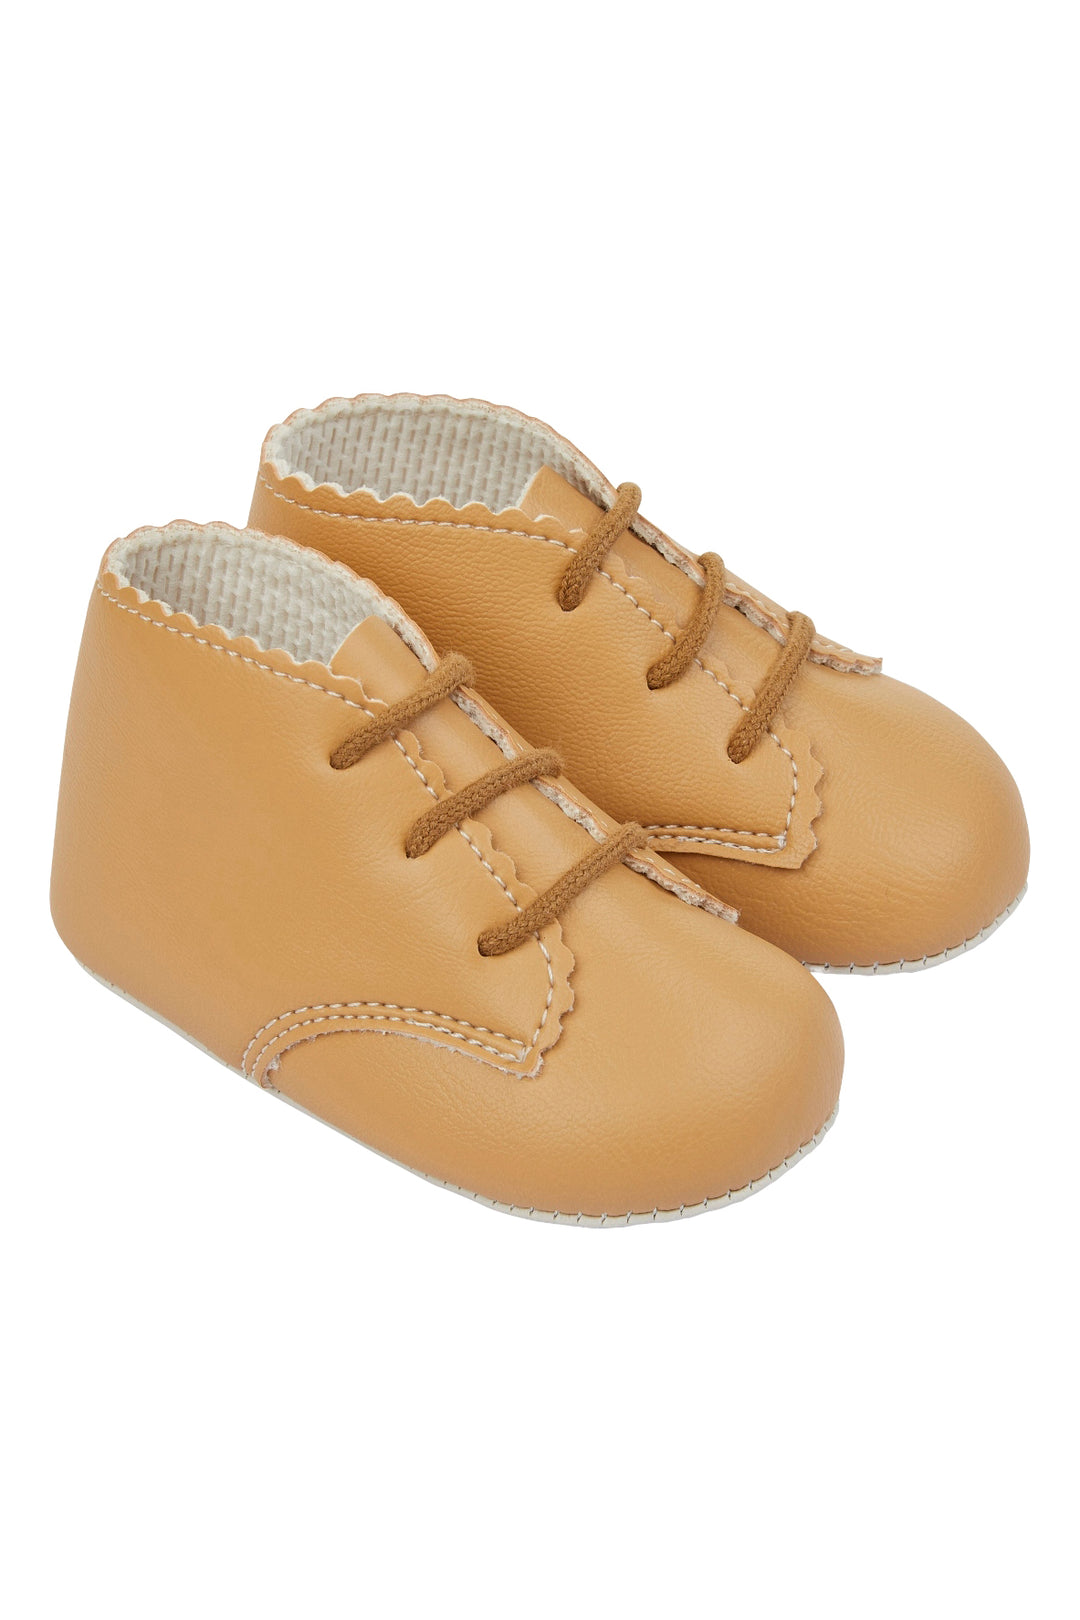 Baypods Camel Soft Sole Booties | Millie and John